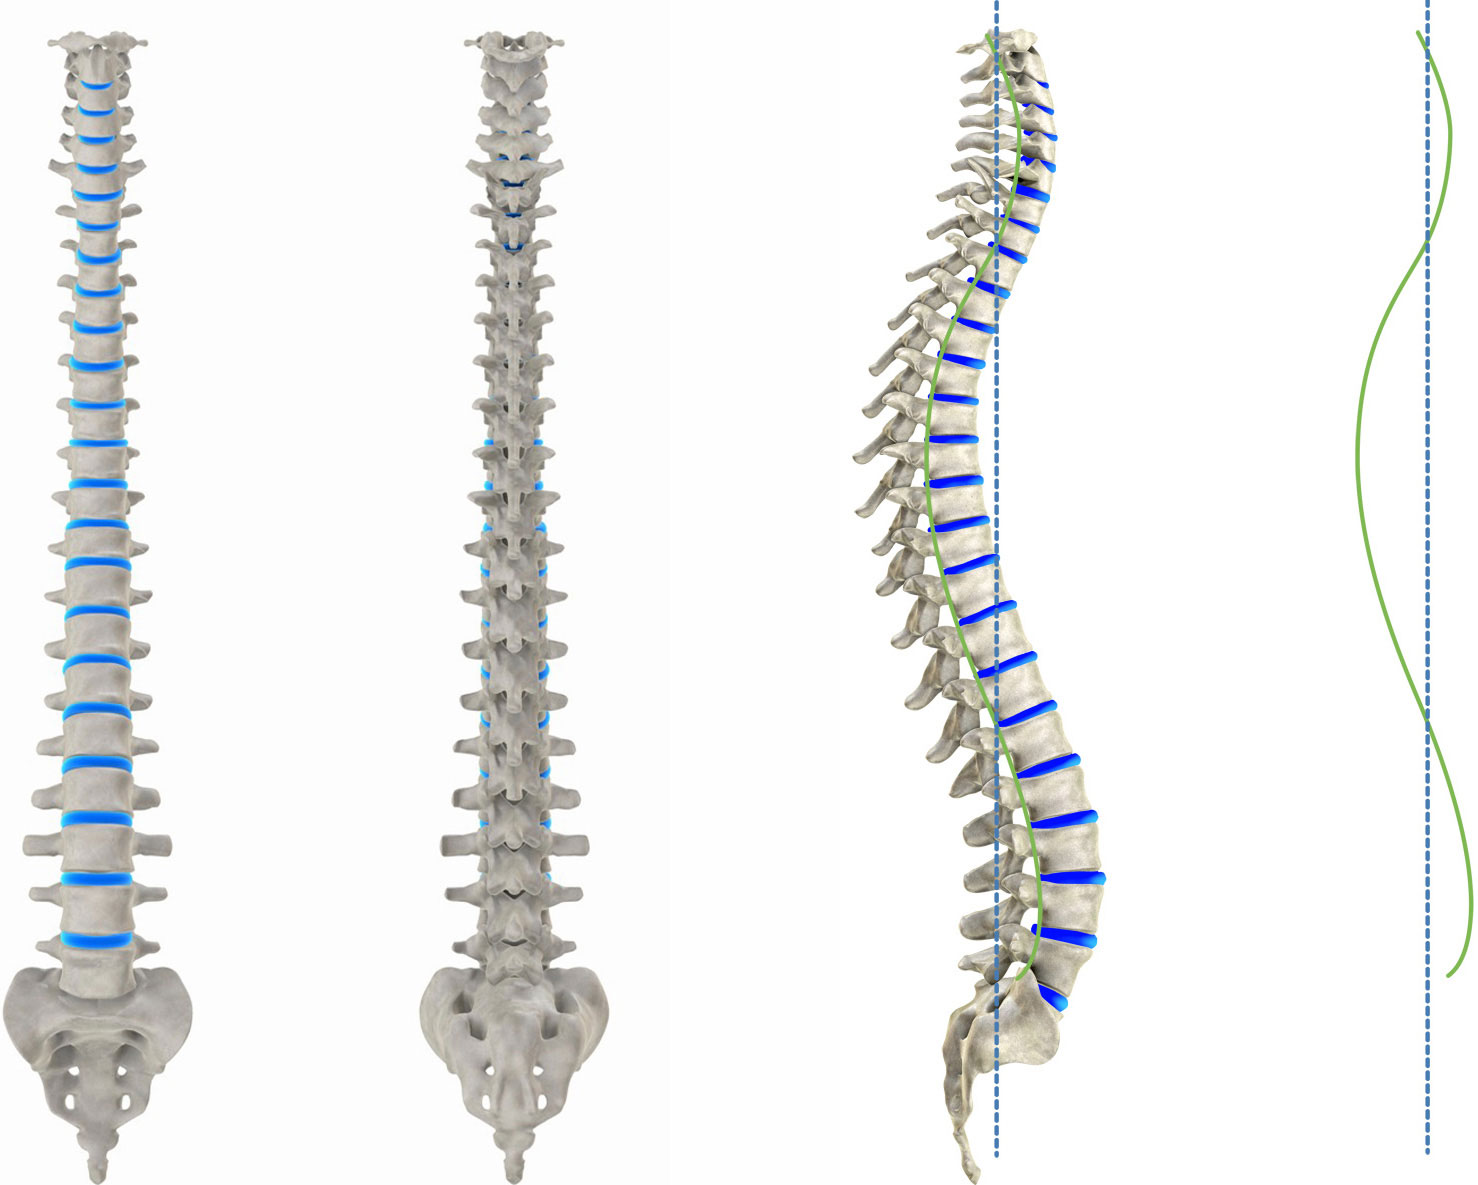 The Ideal Spinal Column